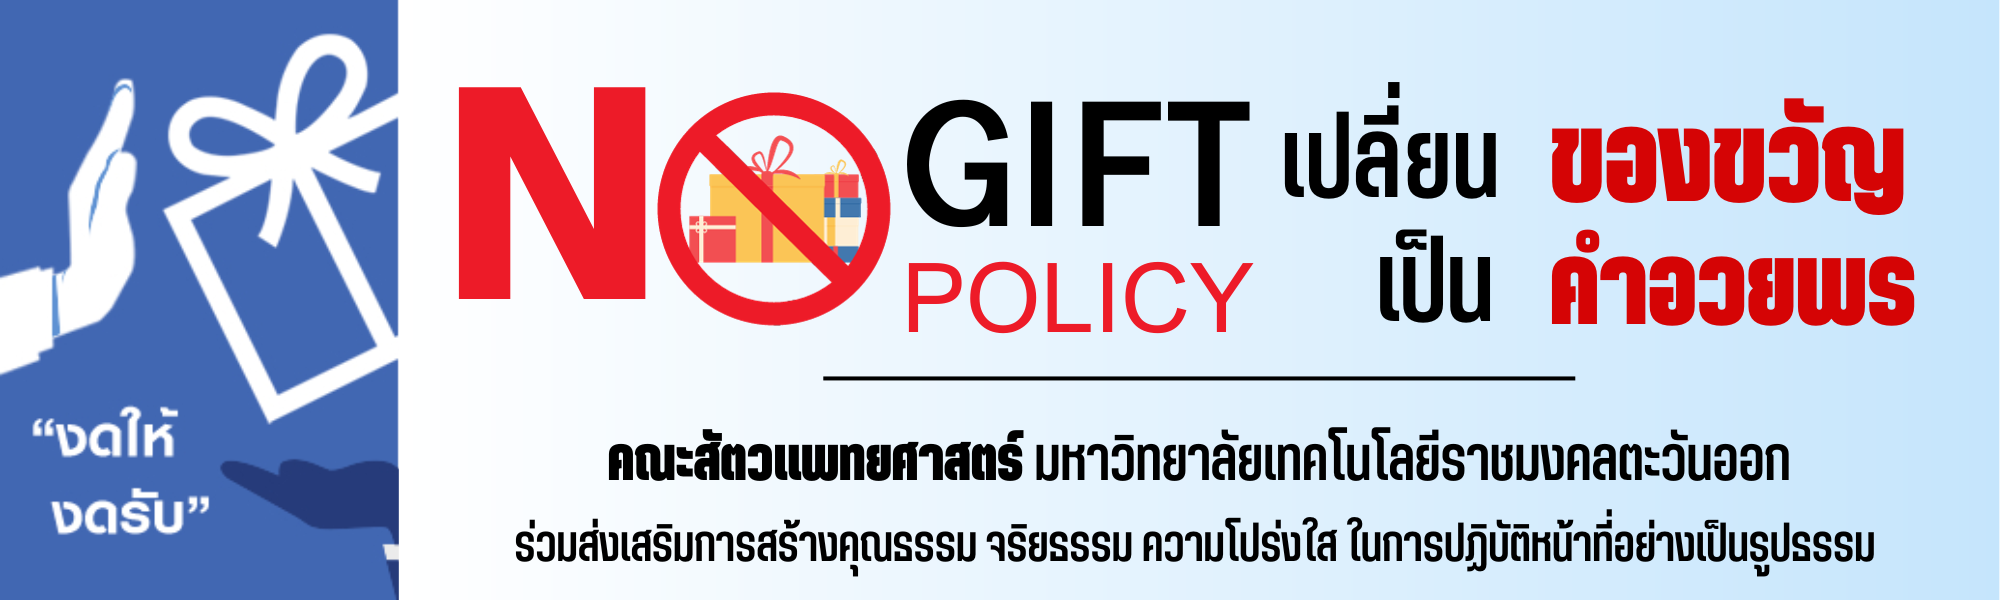 NO GIFT POLICY (2)